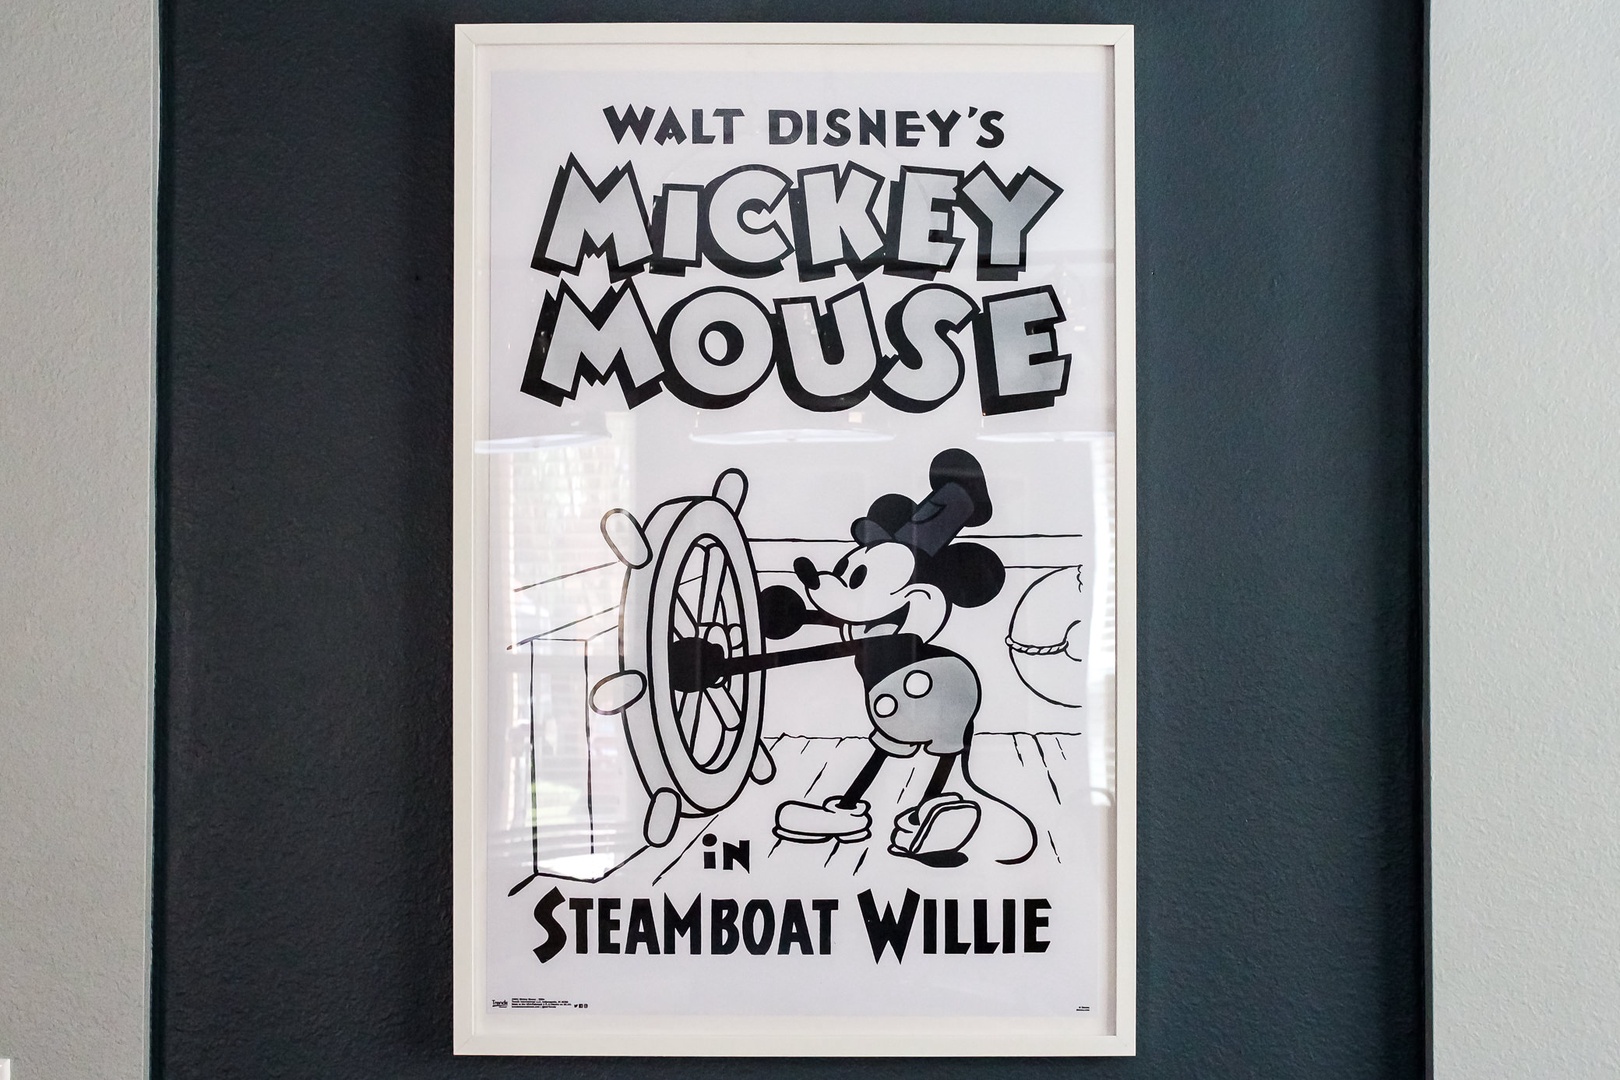 Steamboat Willie movie poster